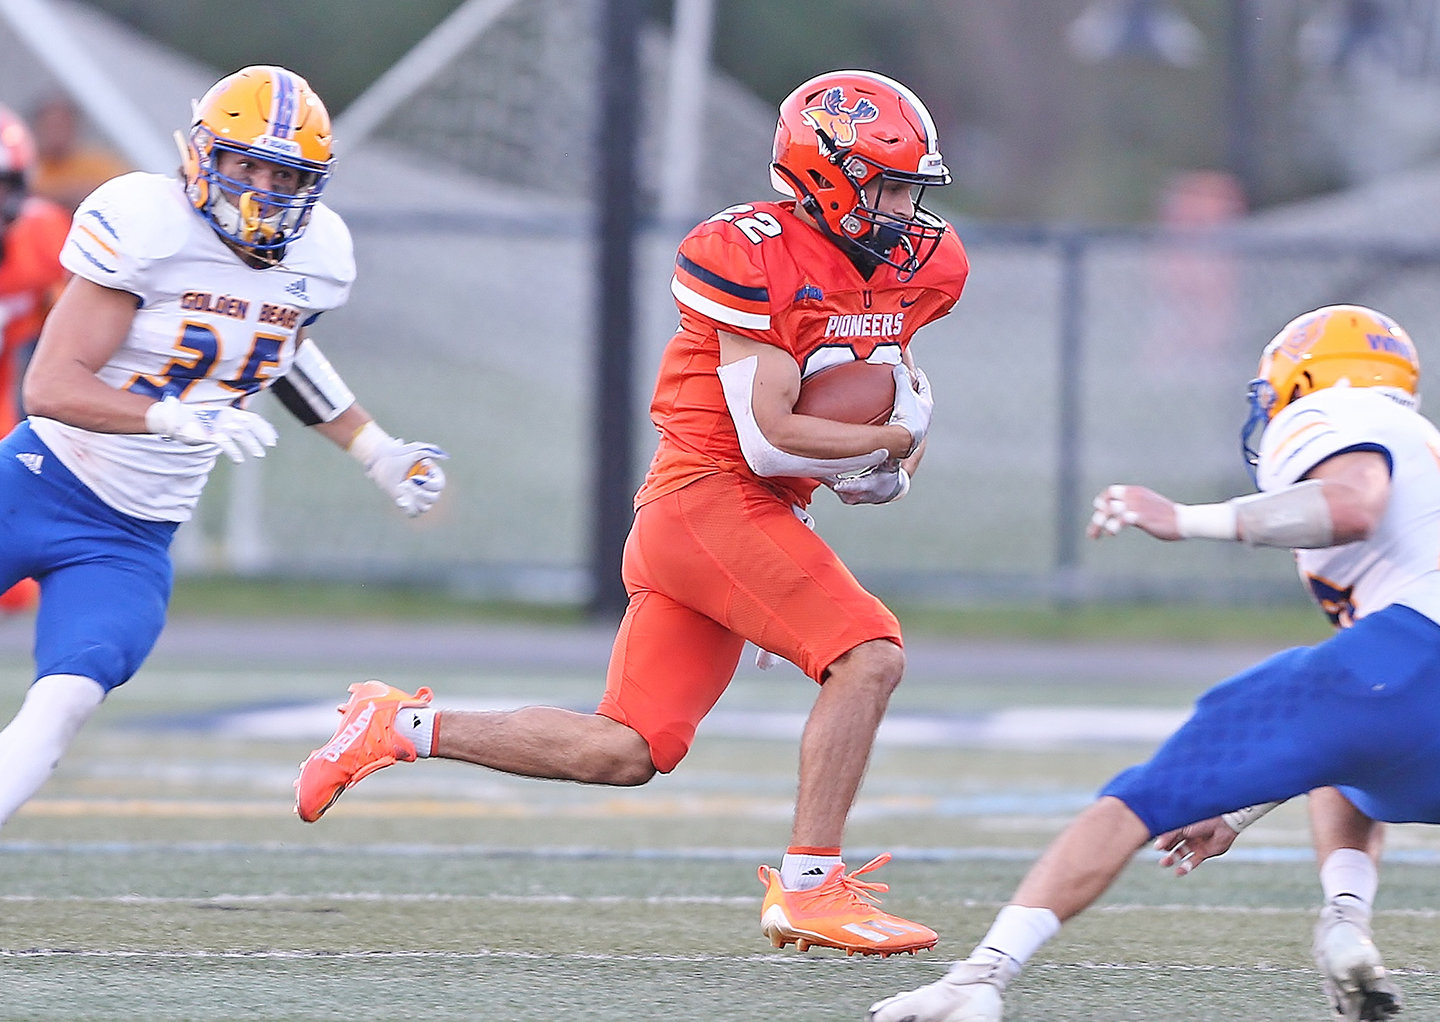 Utica University receiver Nate Palmer, a Vernon-Verona-Sherrill graduate, runs upfield in this file photo from the 2021 season. Saturday, Palmer caught four touchdown passes and had had a career-high 222 receiving yards to help the Pioneers defeat the University of Rochester at home, 43-28, to open the season.